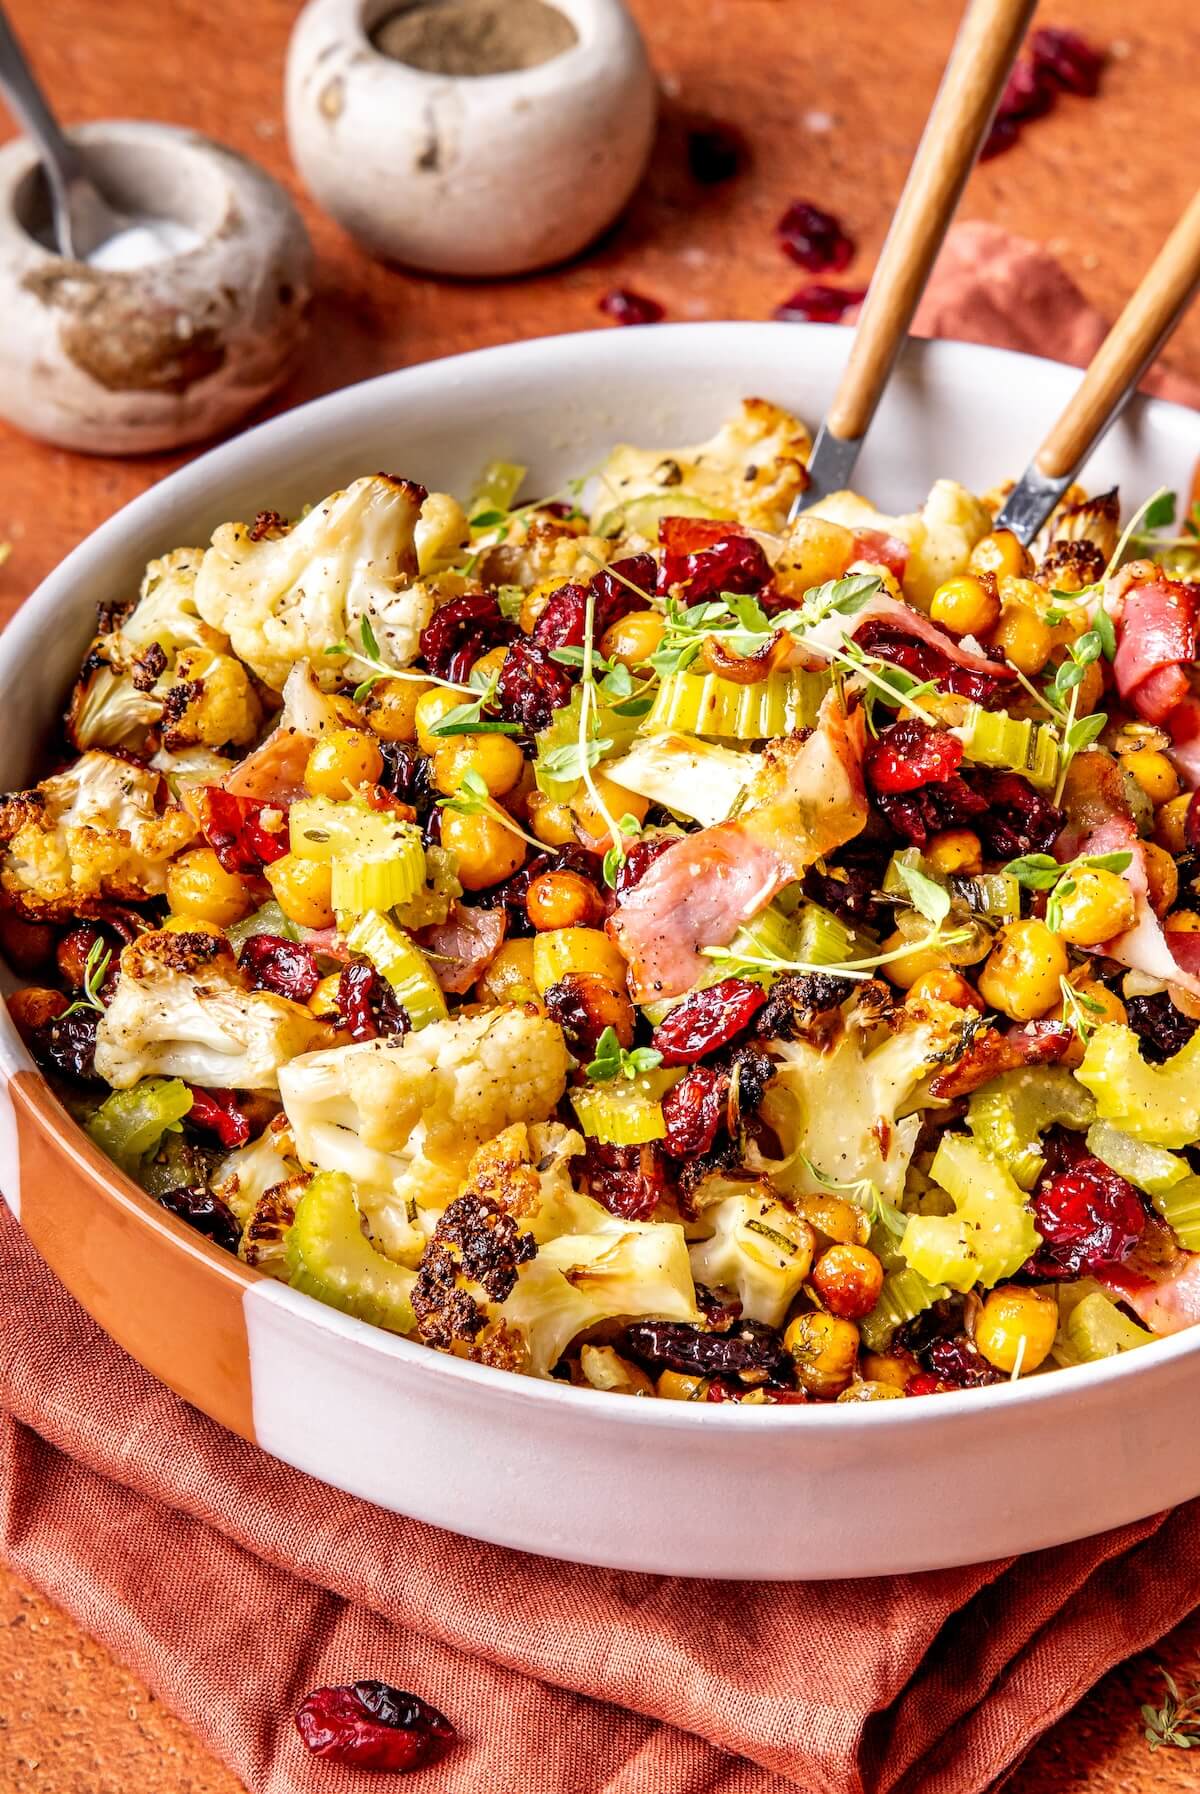 Herb and Maple Roasted Cauliflower with Chickpeas - Olivia Adriance